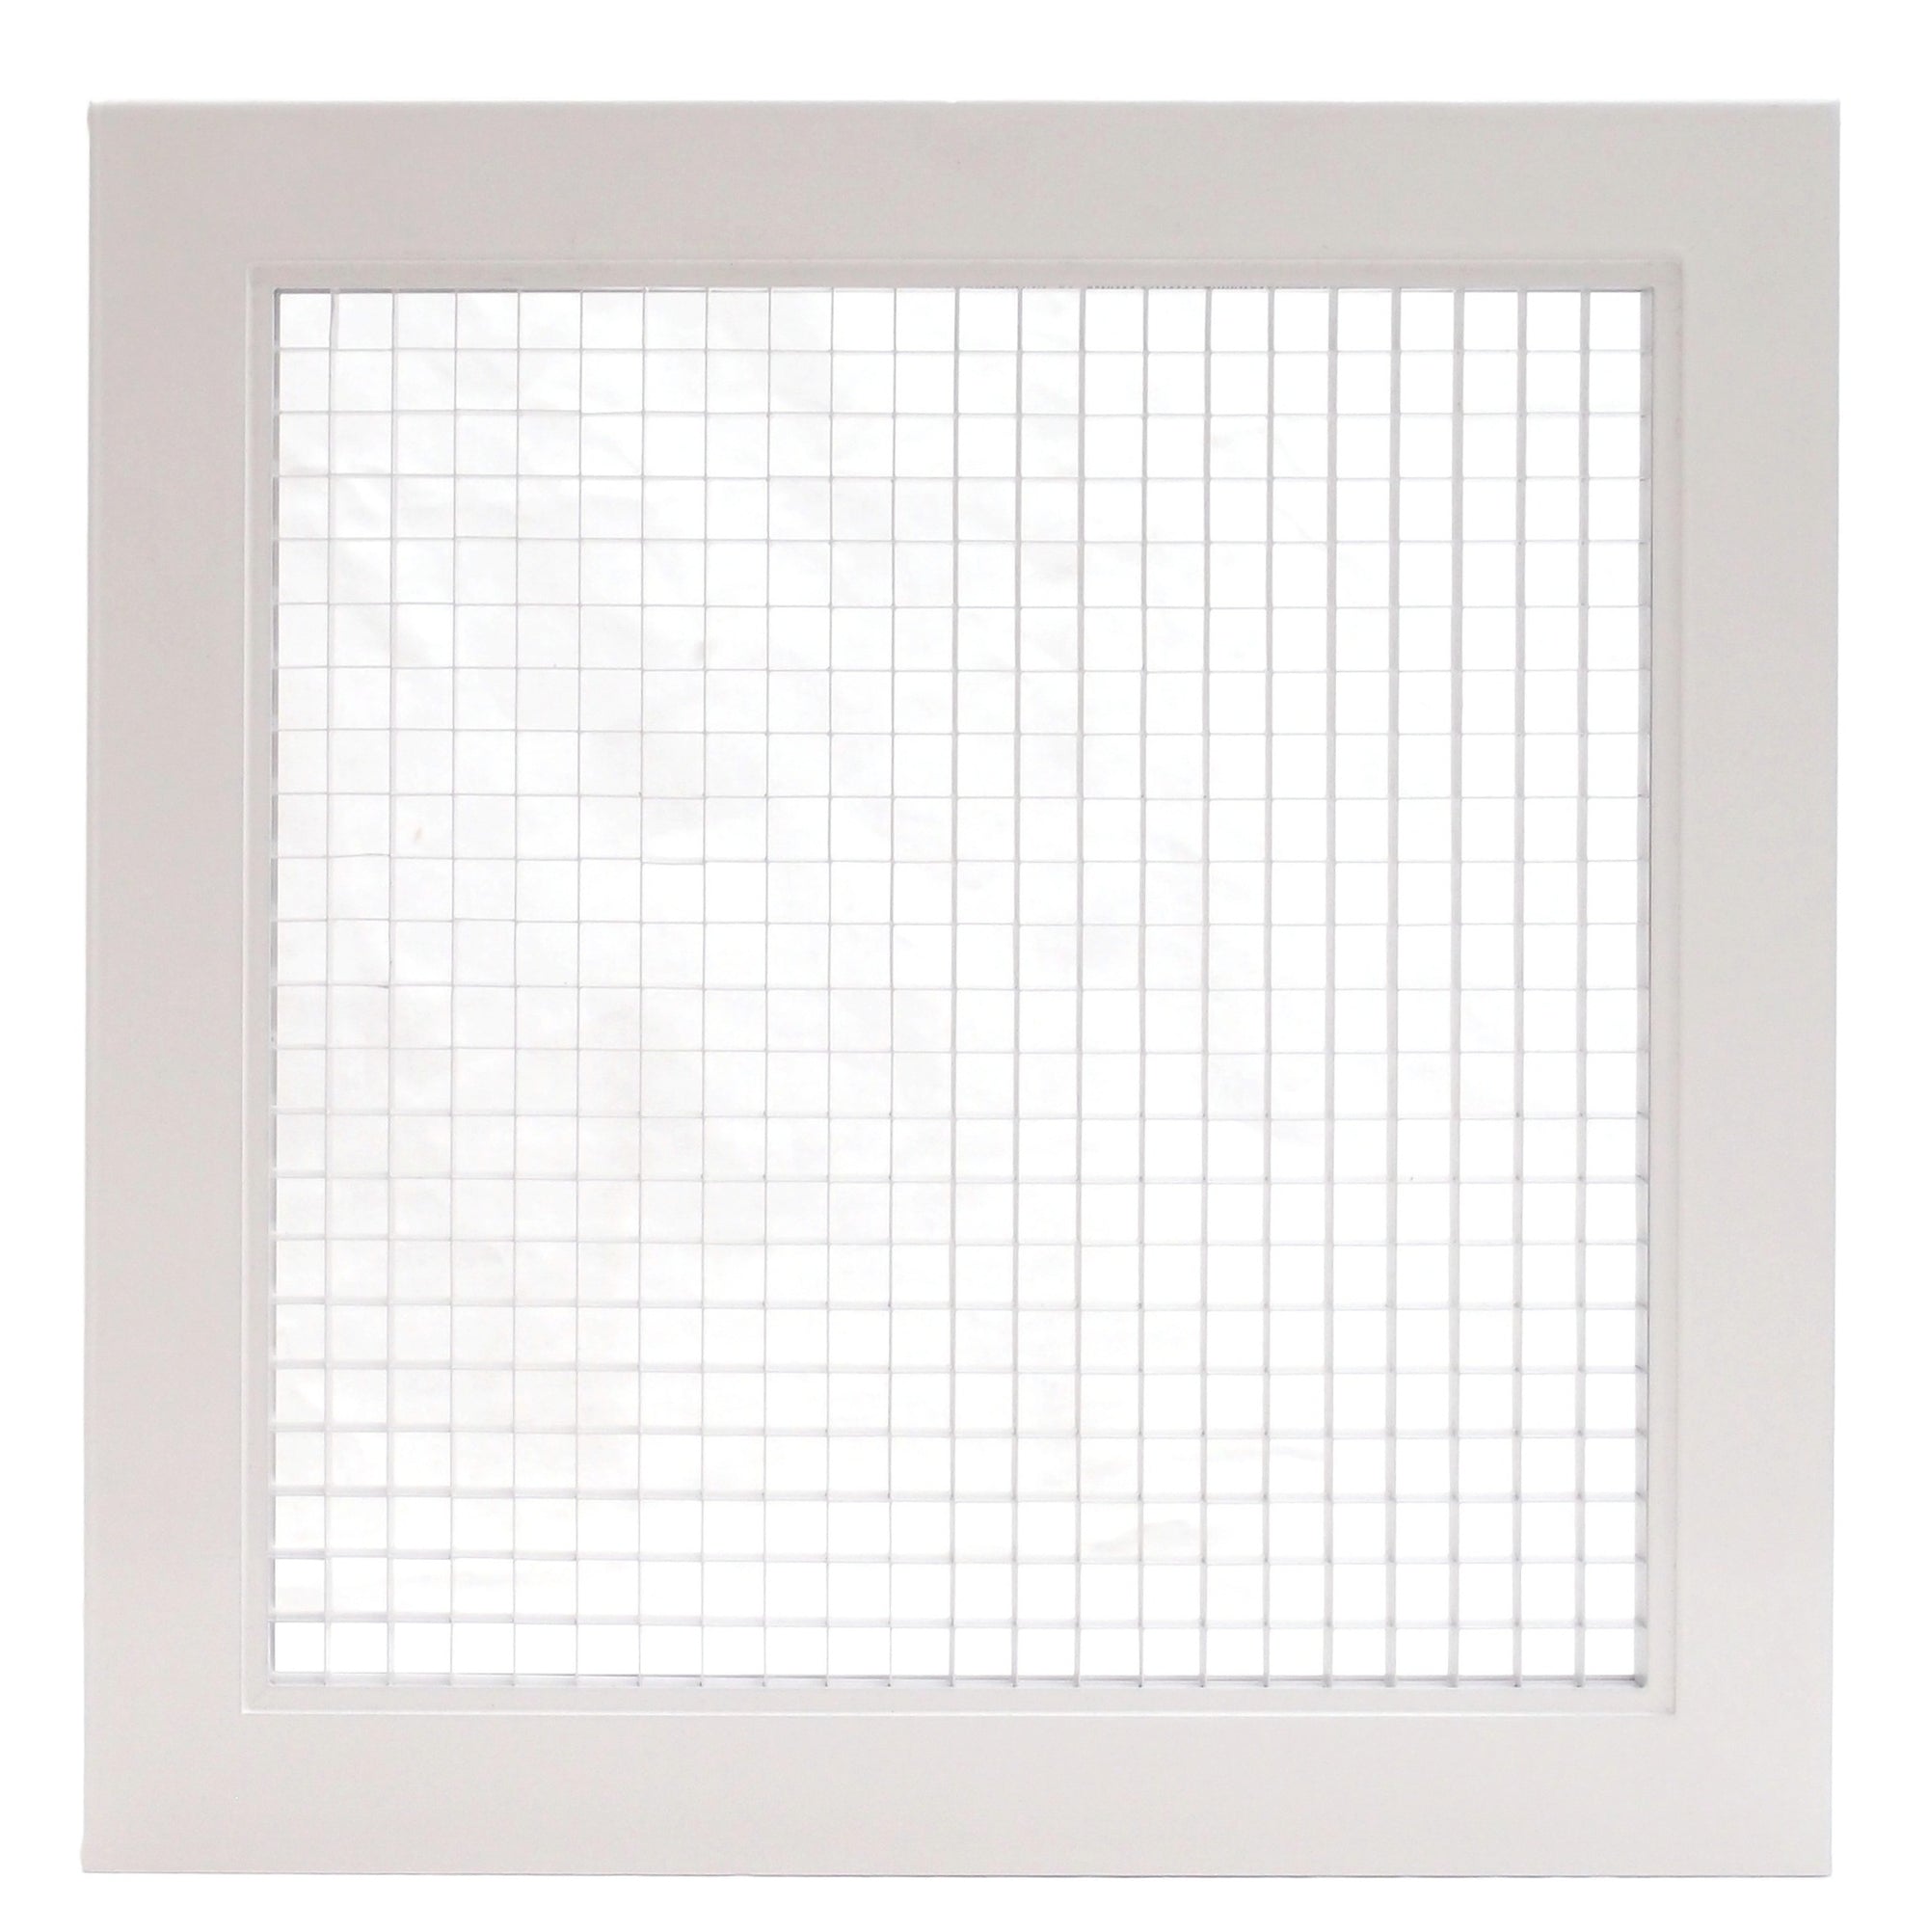 32" x 10" Cube Core Eggcrate Return Air Filter Grille for 1" Filter